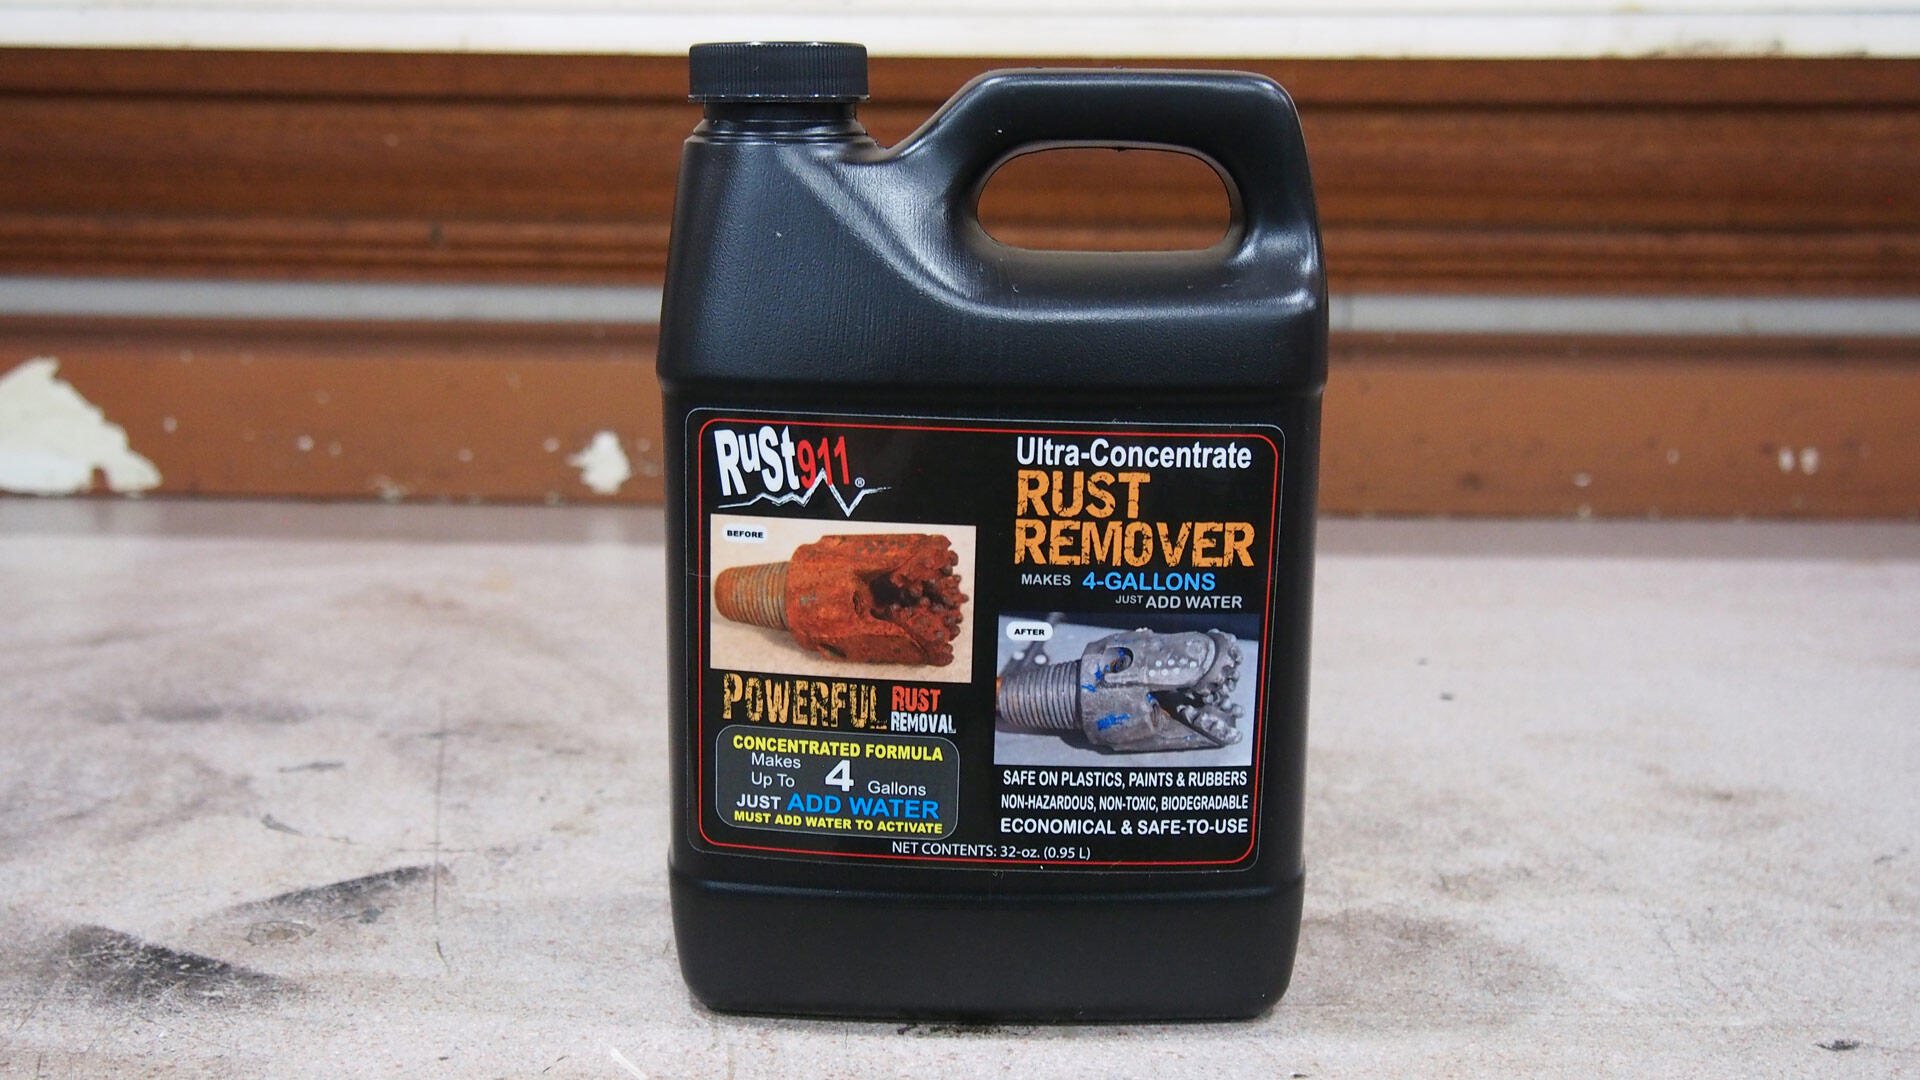 Quality Chemical's Rust-B-Gone Rust Stain Remover/Rust Reformer/Rust  Neutralizer for Metal/Metal Rust Remover/Rust Remover/Rust Inhibitor,/Rust  Converter for Removing Rust 128 oz (Combo) - Yahoo Shopping